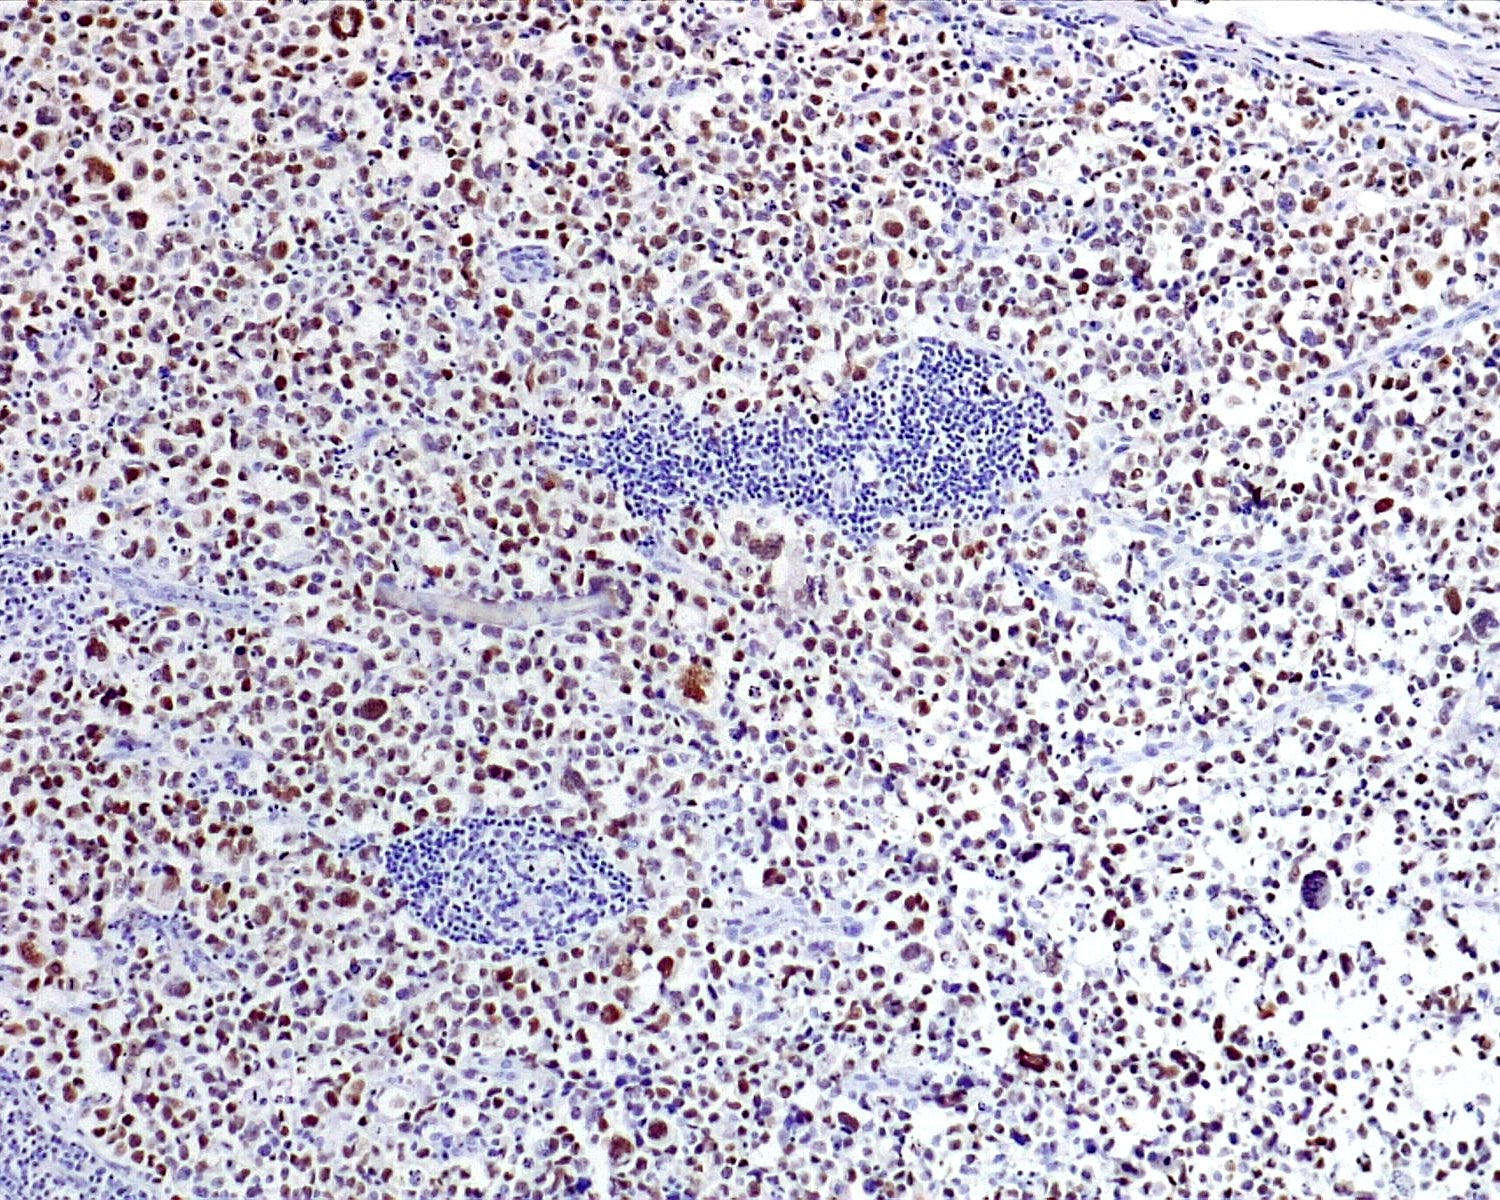 EBER positivity in EBV positive diffuse large B cell lymphoma